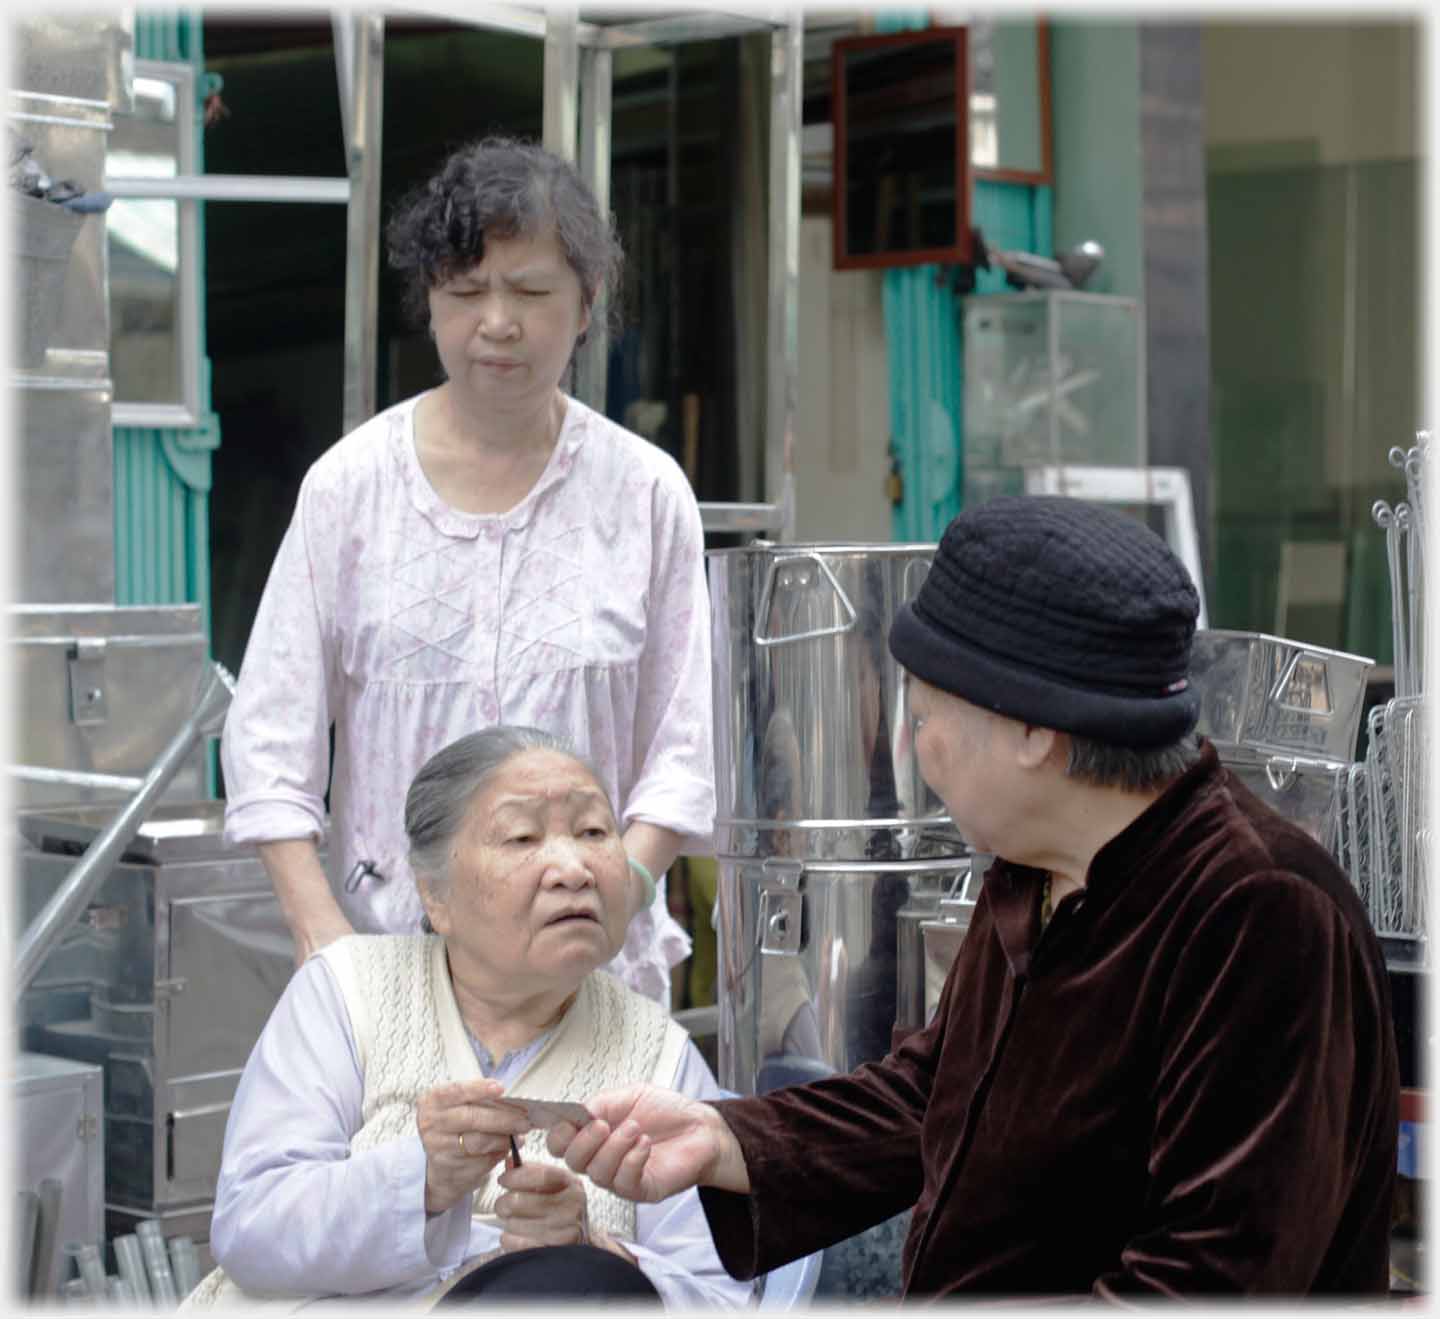 Two older women sitting together passing a small paper, younger woman standing behind.